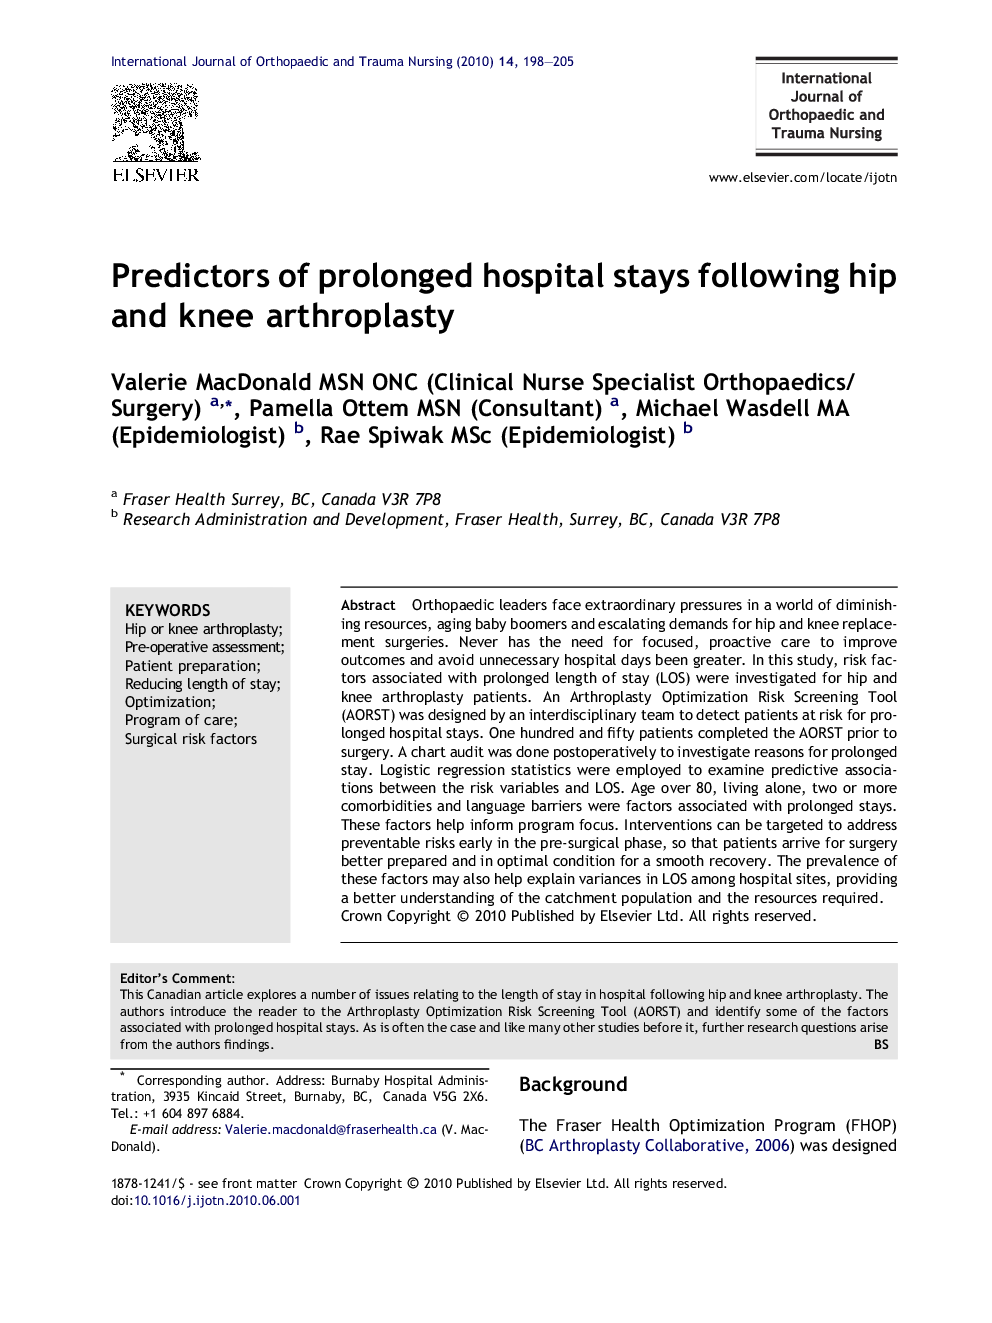 Predictors of prolonged hospital stays following hip and knee arthroplasty